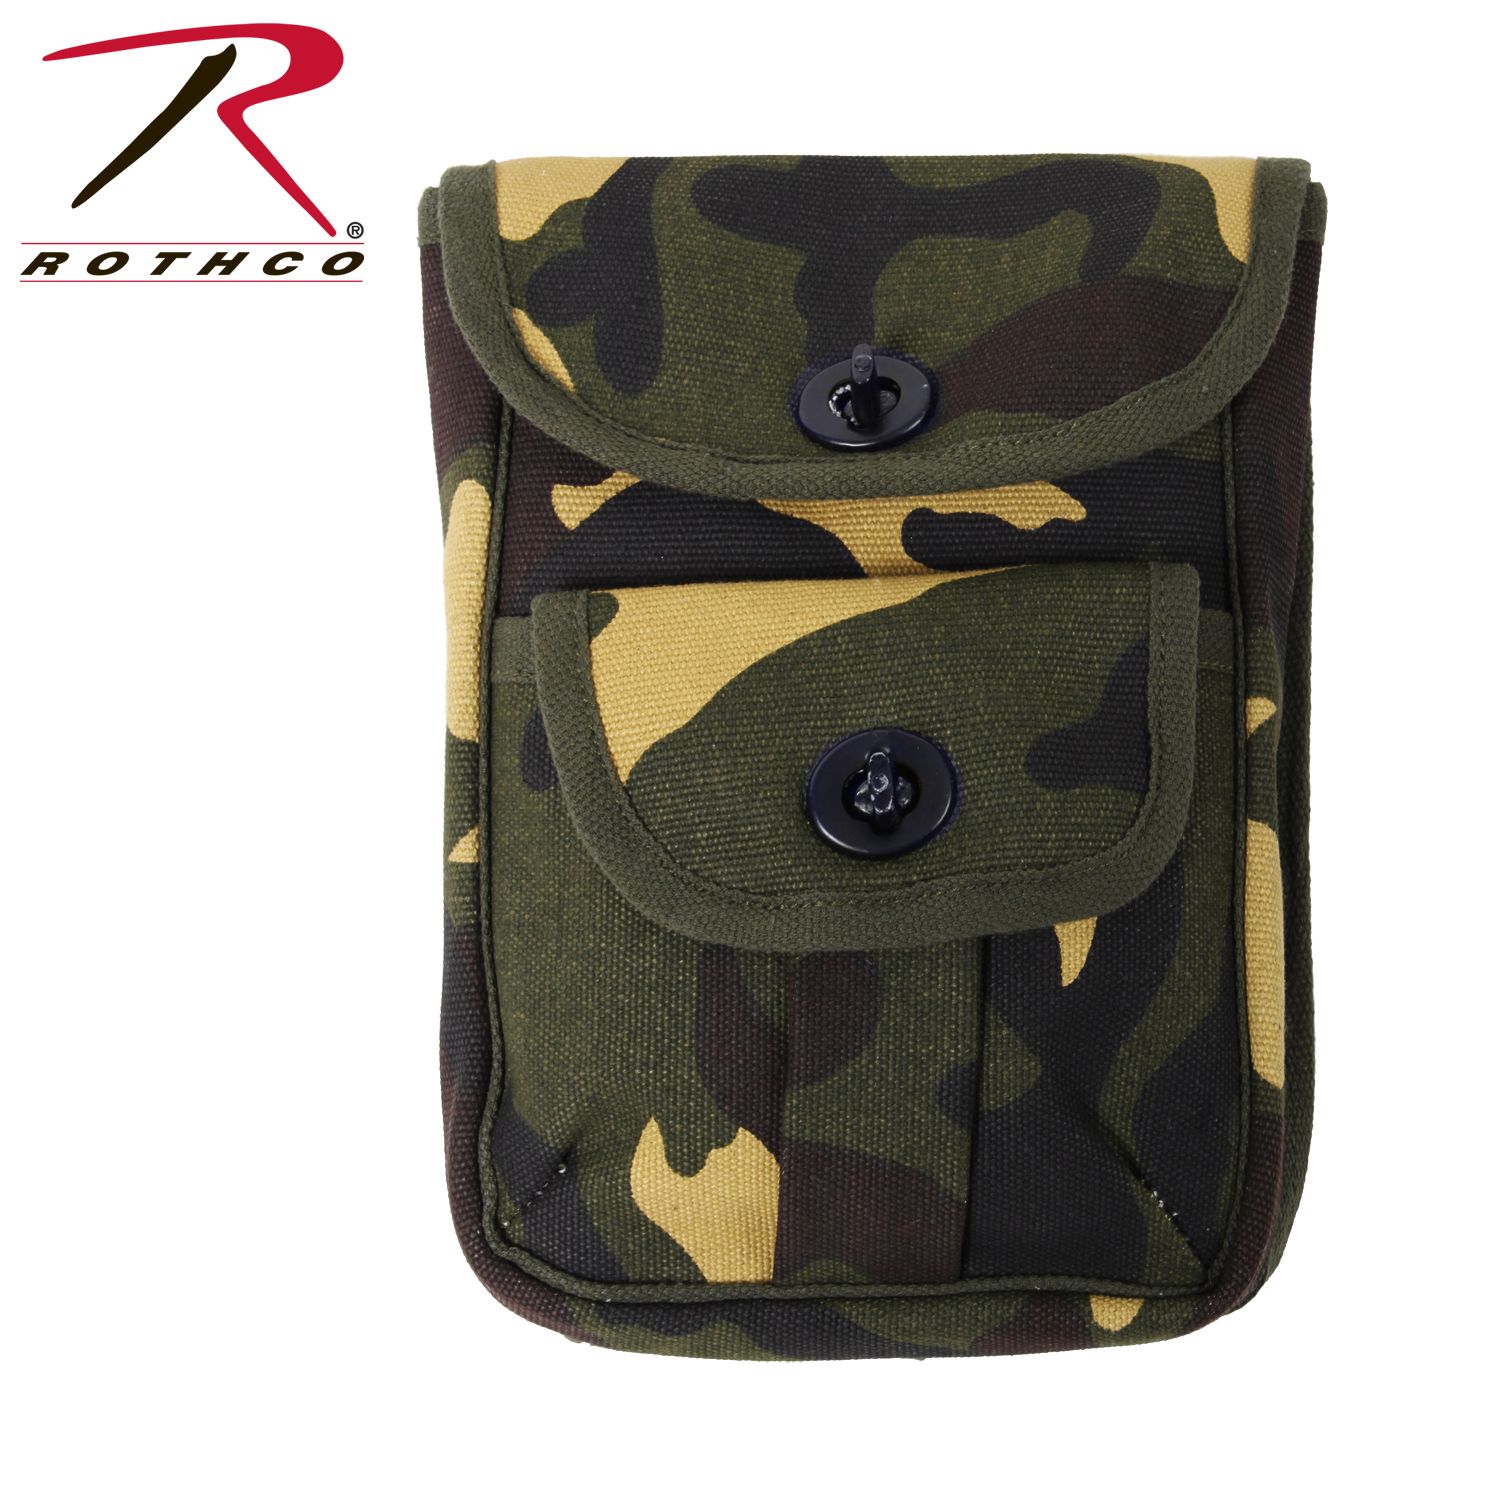 Camouflage for sale online Rothco 9802 2 Pocket Canvas Ammo Pouch 